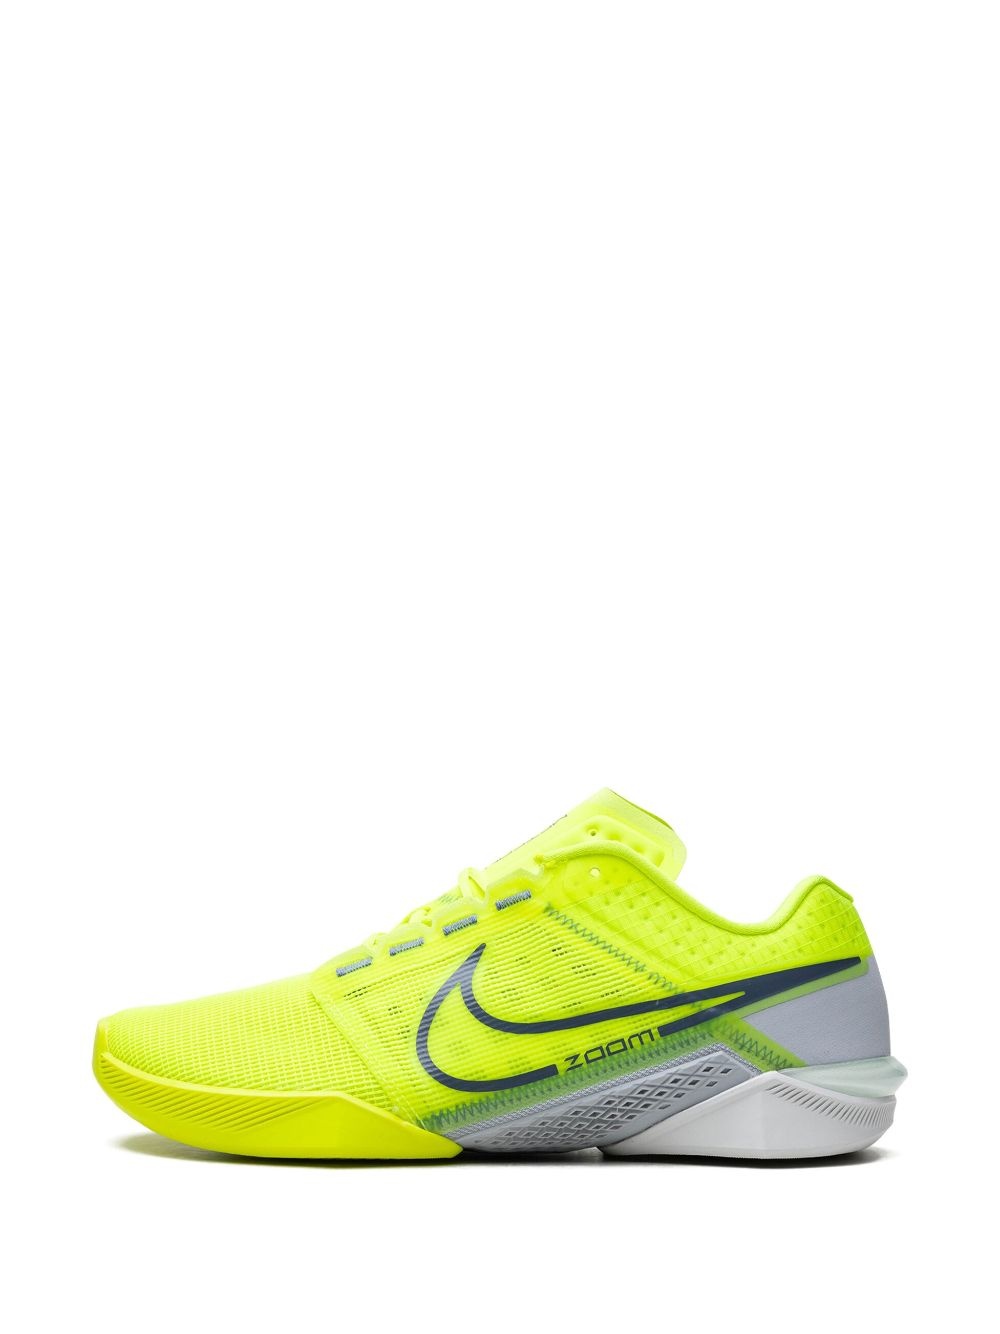 Zoom Metcon Turbo 2 "Volt/Diffused Blue" sneakers - 6